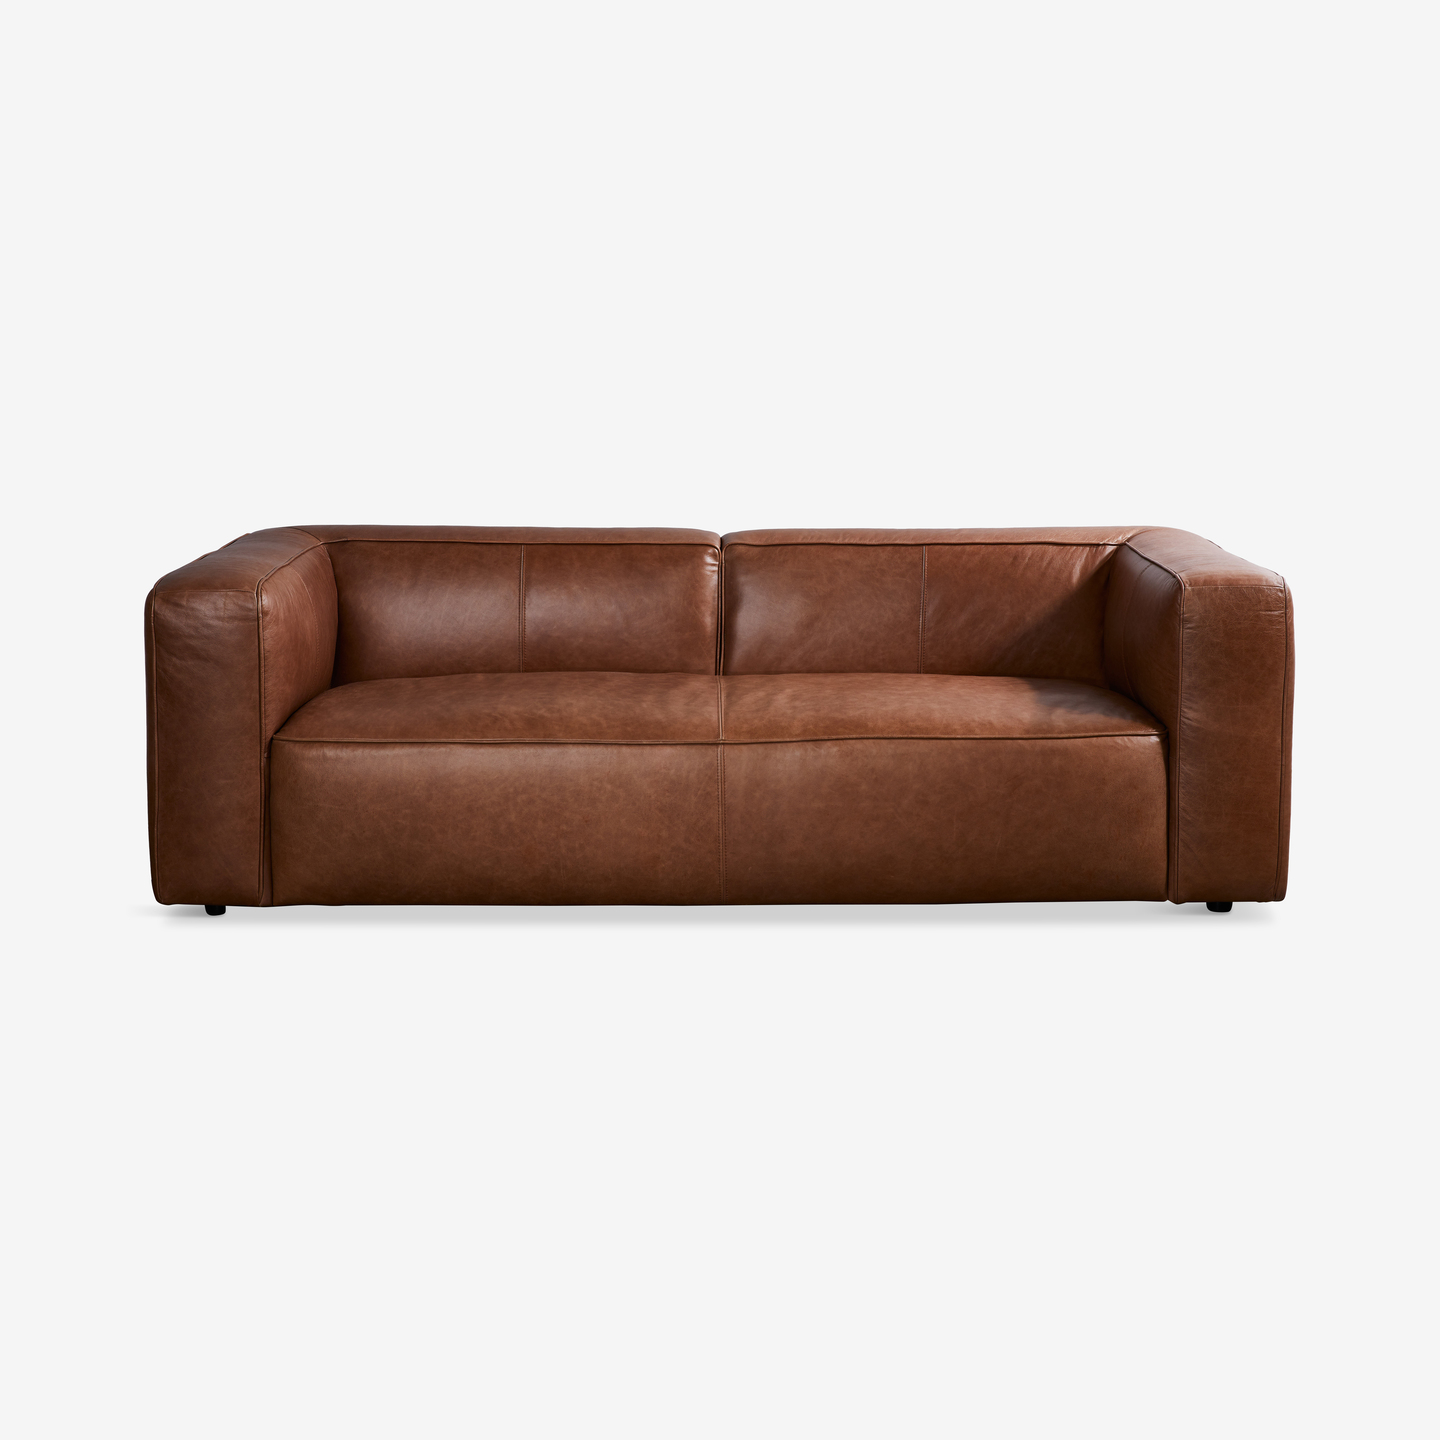 665_Lenyx-Leather-Sofa-Cognac_Flat-Front_Industrial_Living-Room-4 2020